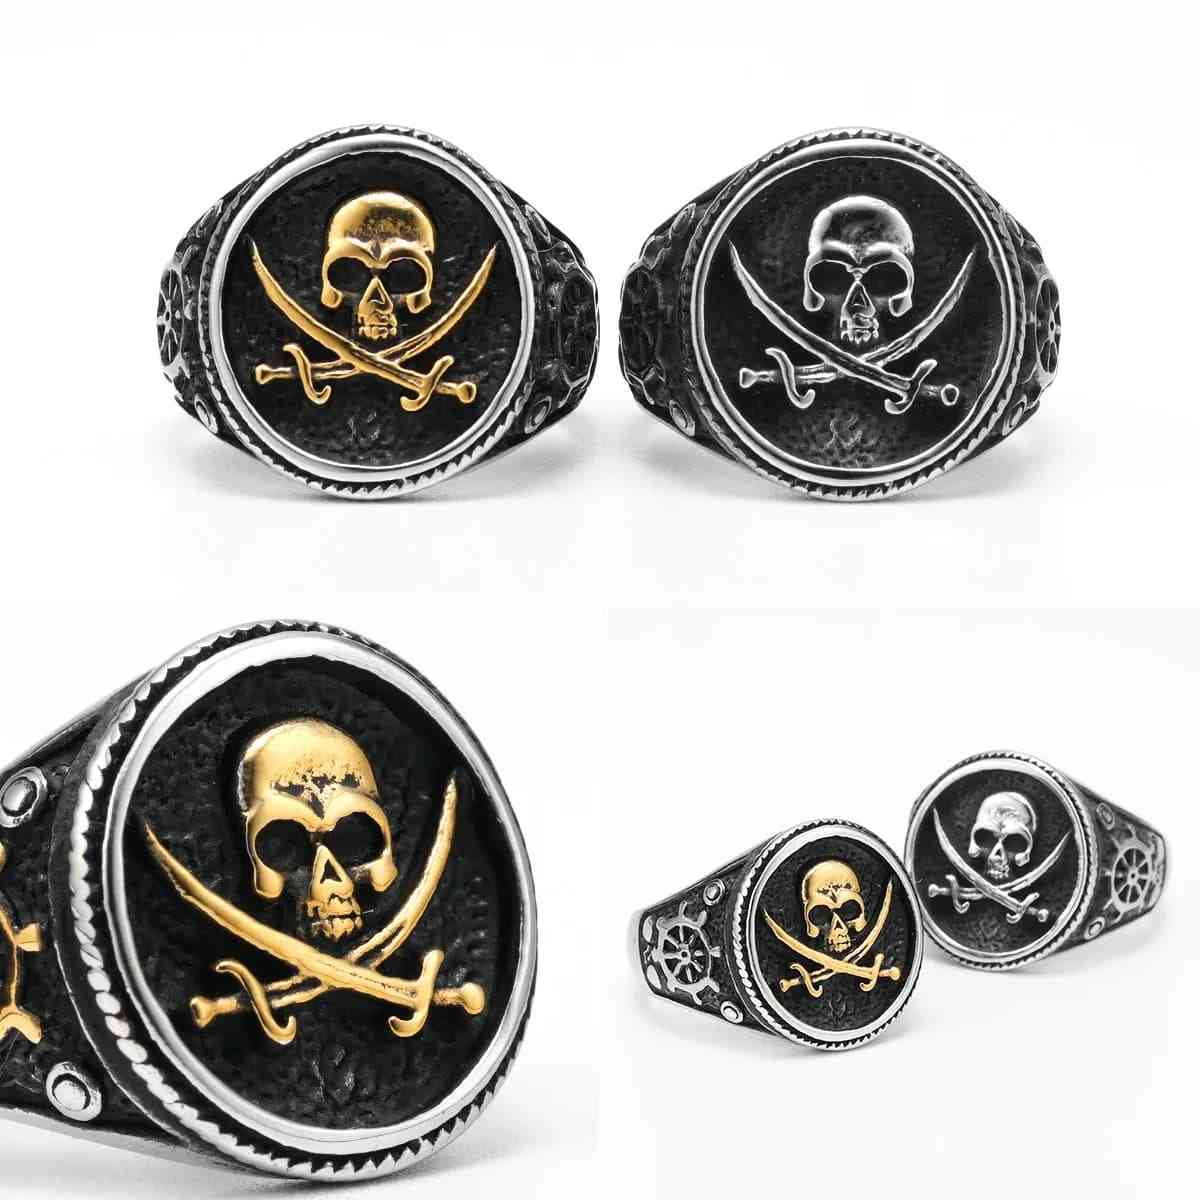 Pirate Signet Ring with Skull and Swords